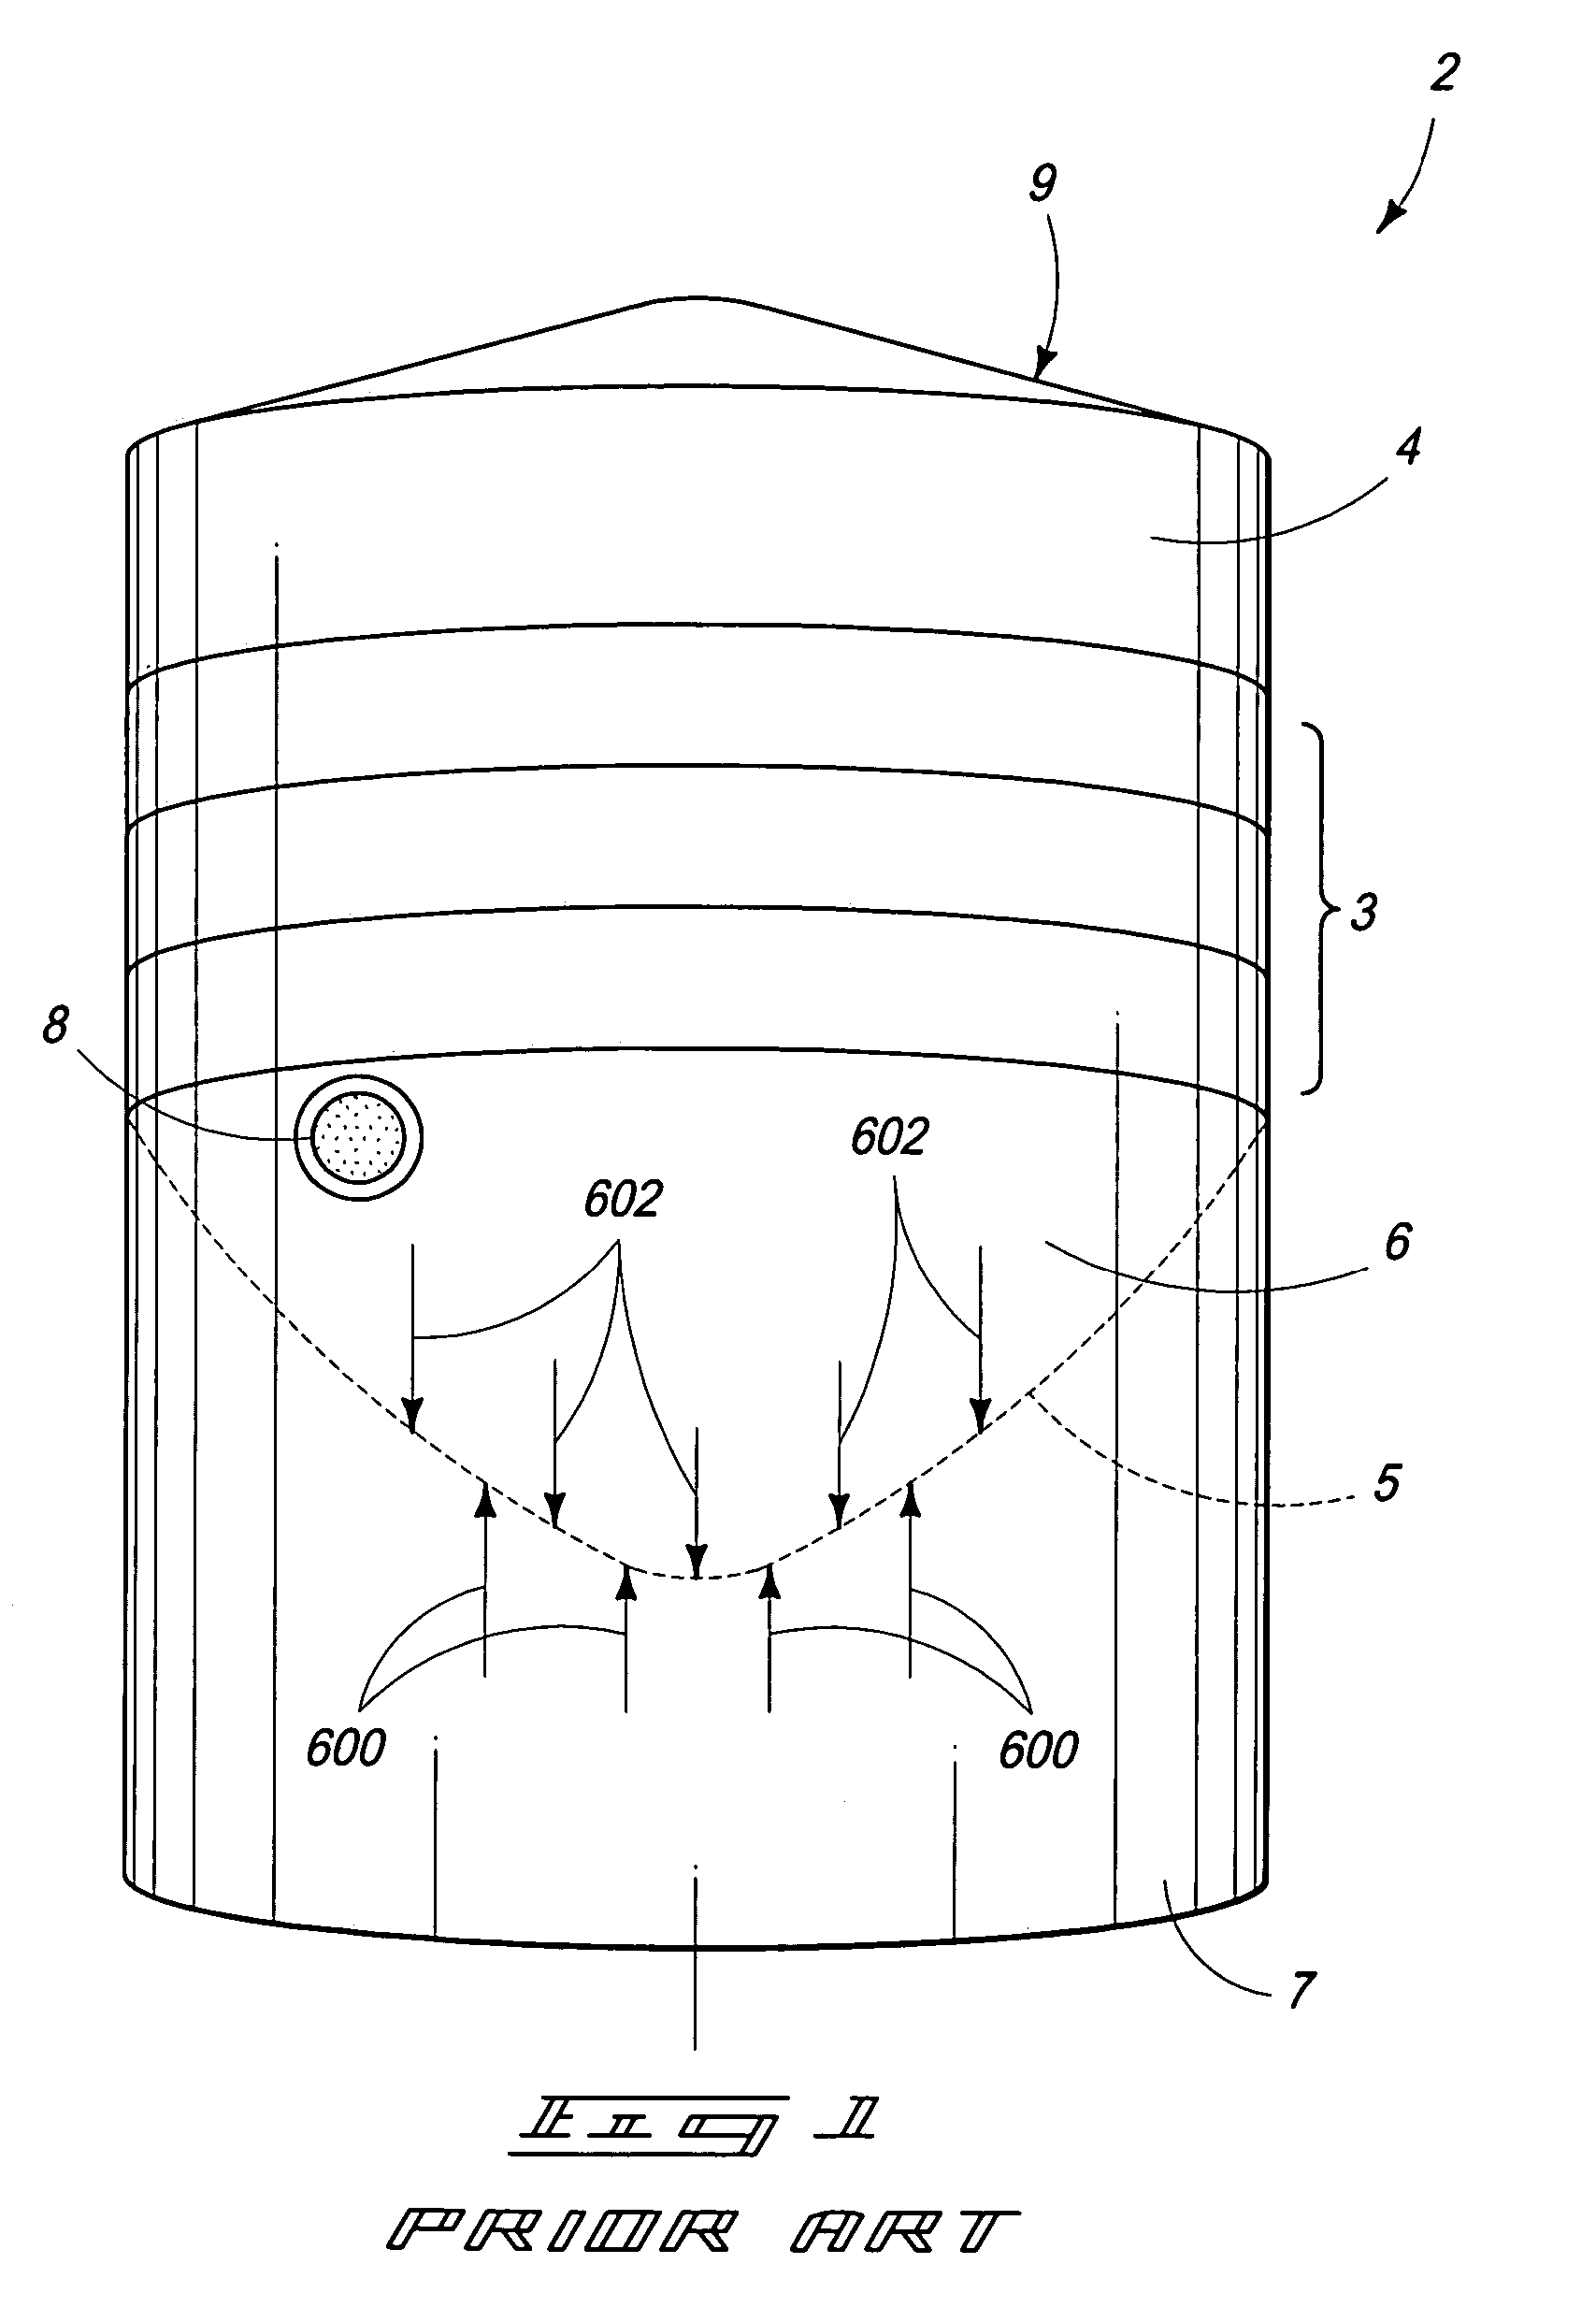 Systems, devices and methods for regulating temperatures of tanks, containers and contents therein